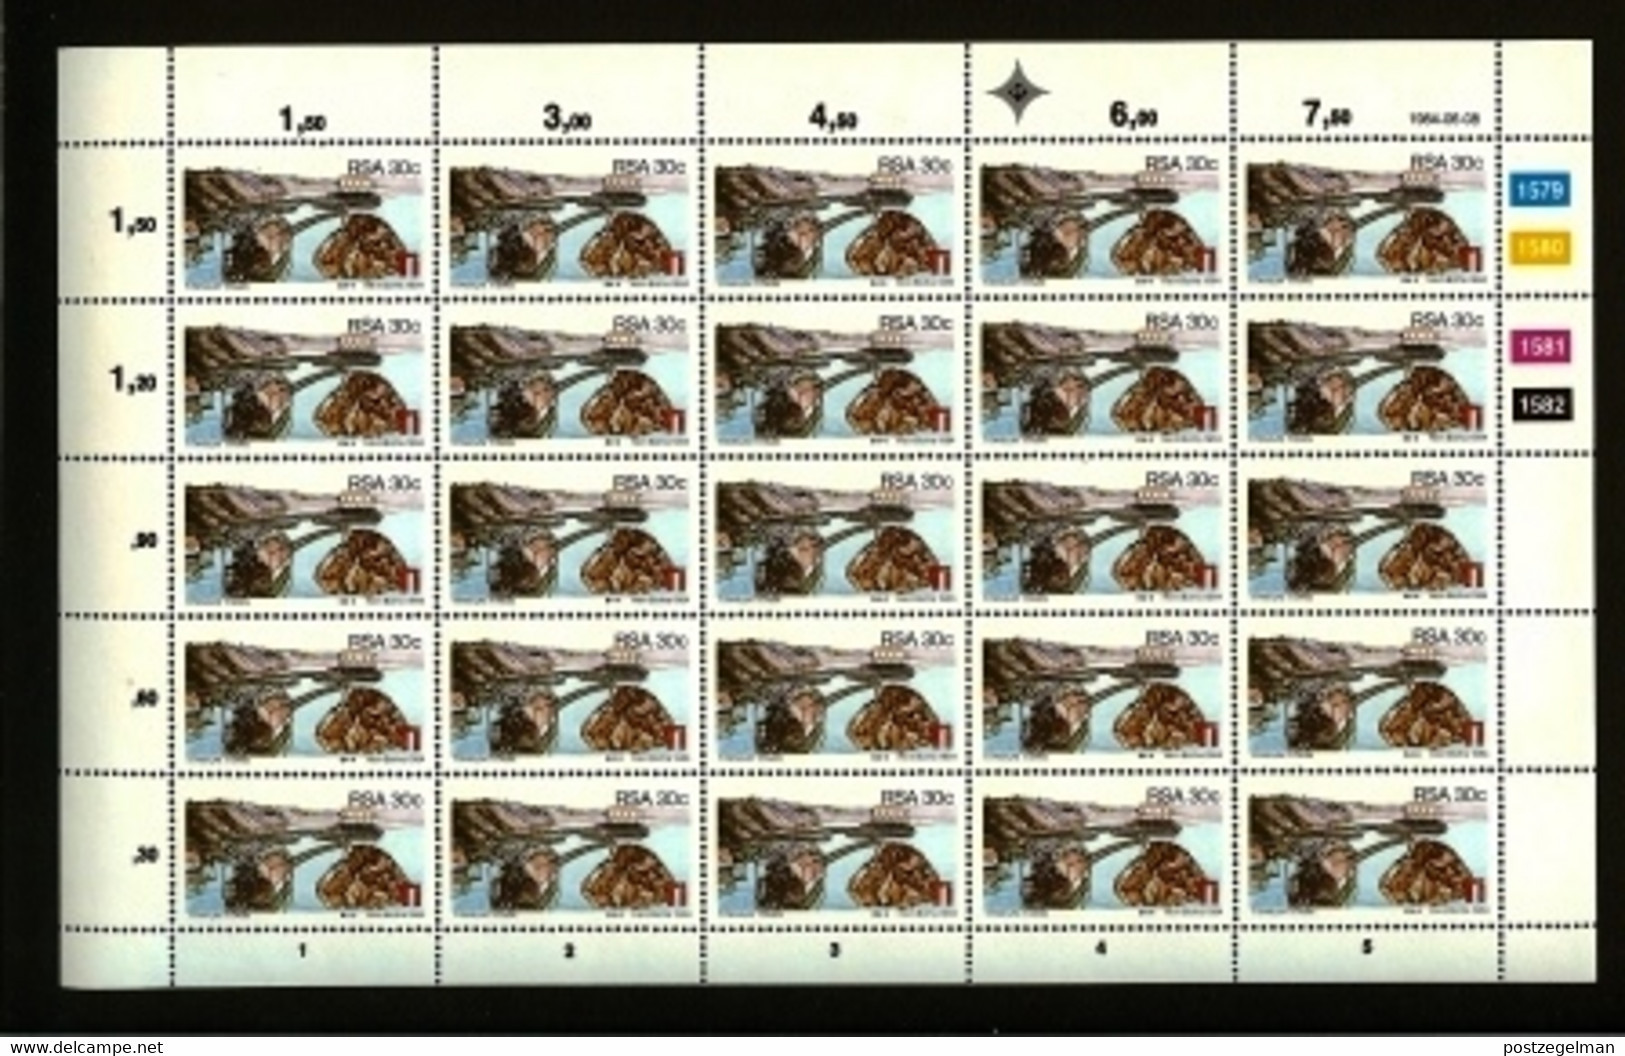 RSA, 1984, MNH, 25 Stamp(s) On Full Sheet(s), Minerals, Michell Nr(s).  647-650, Scannr. F2507 - Unused Stamps